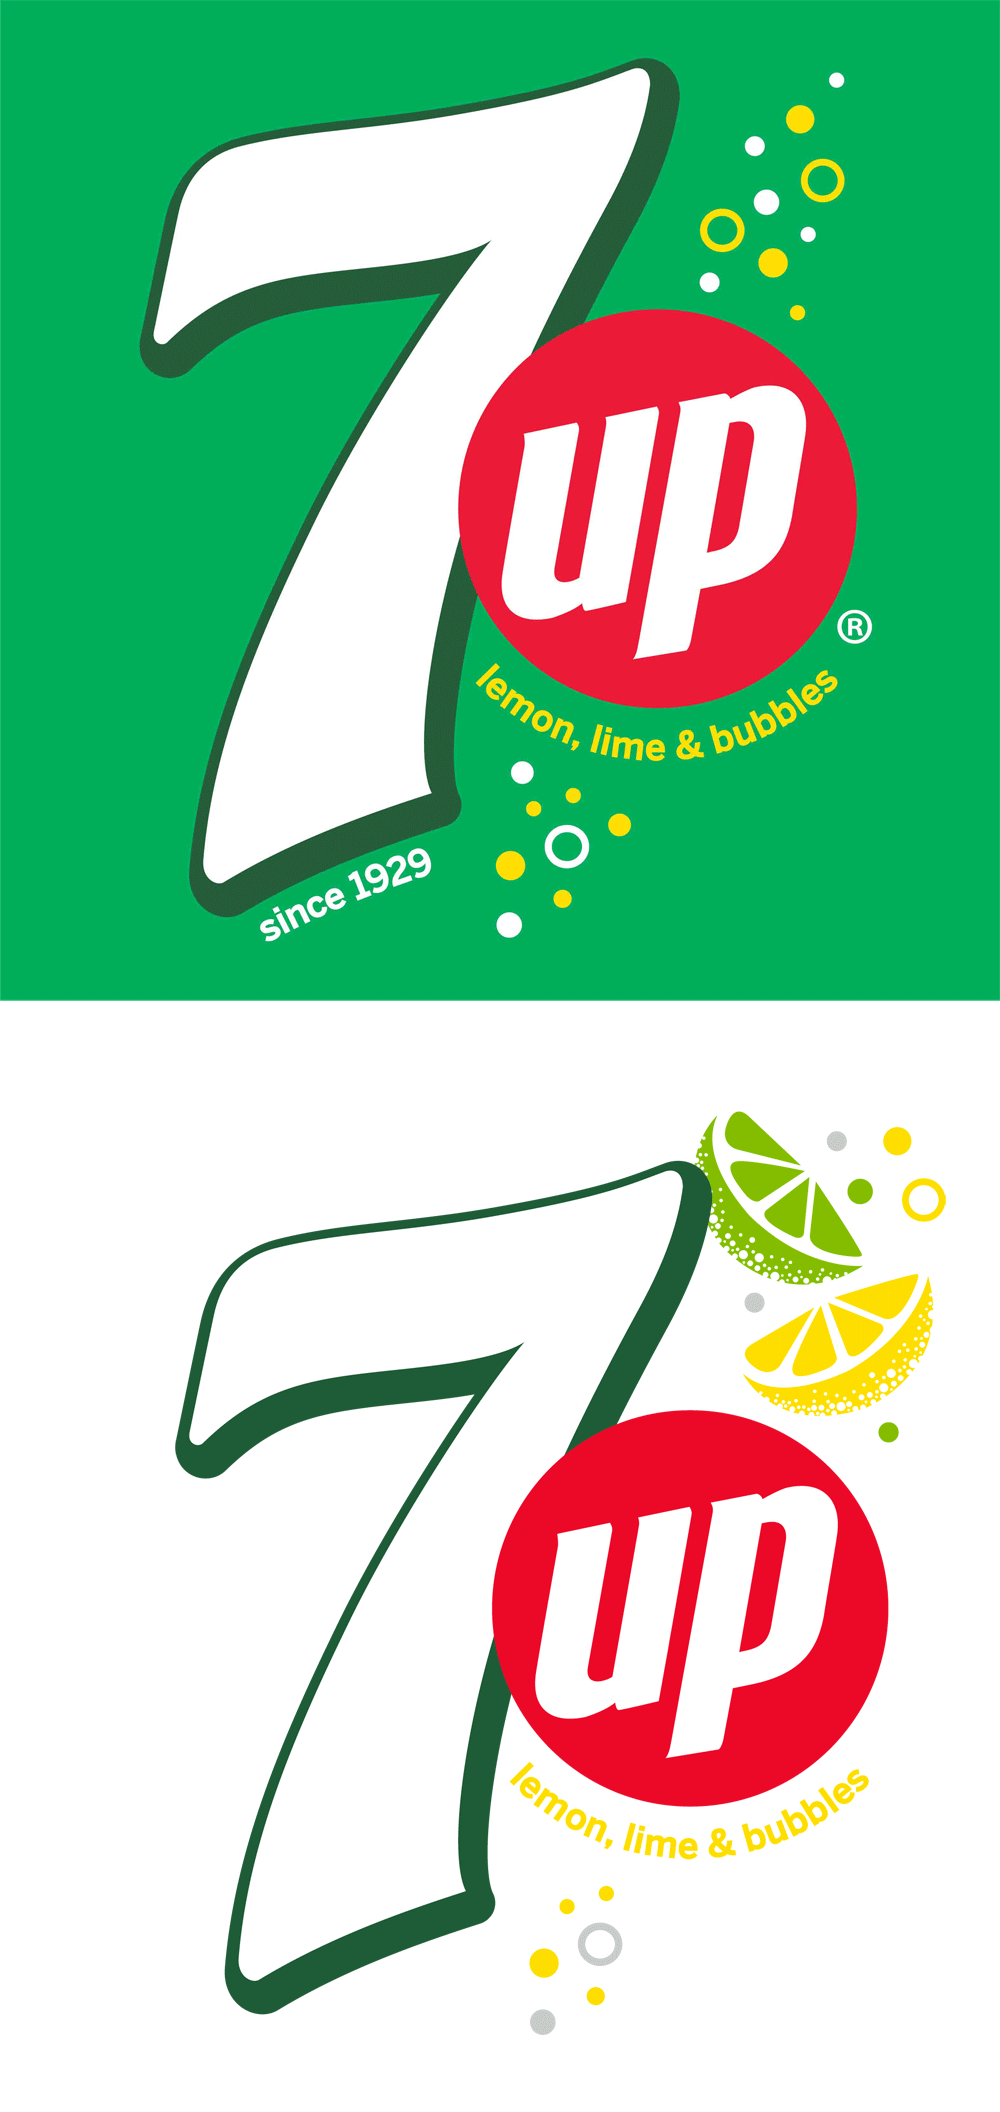 7up_2014_logo_detail_official